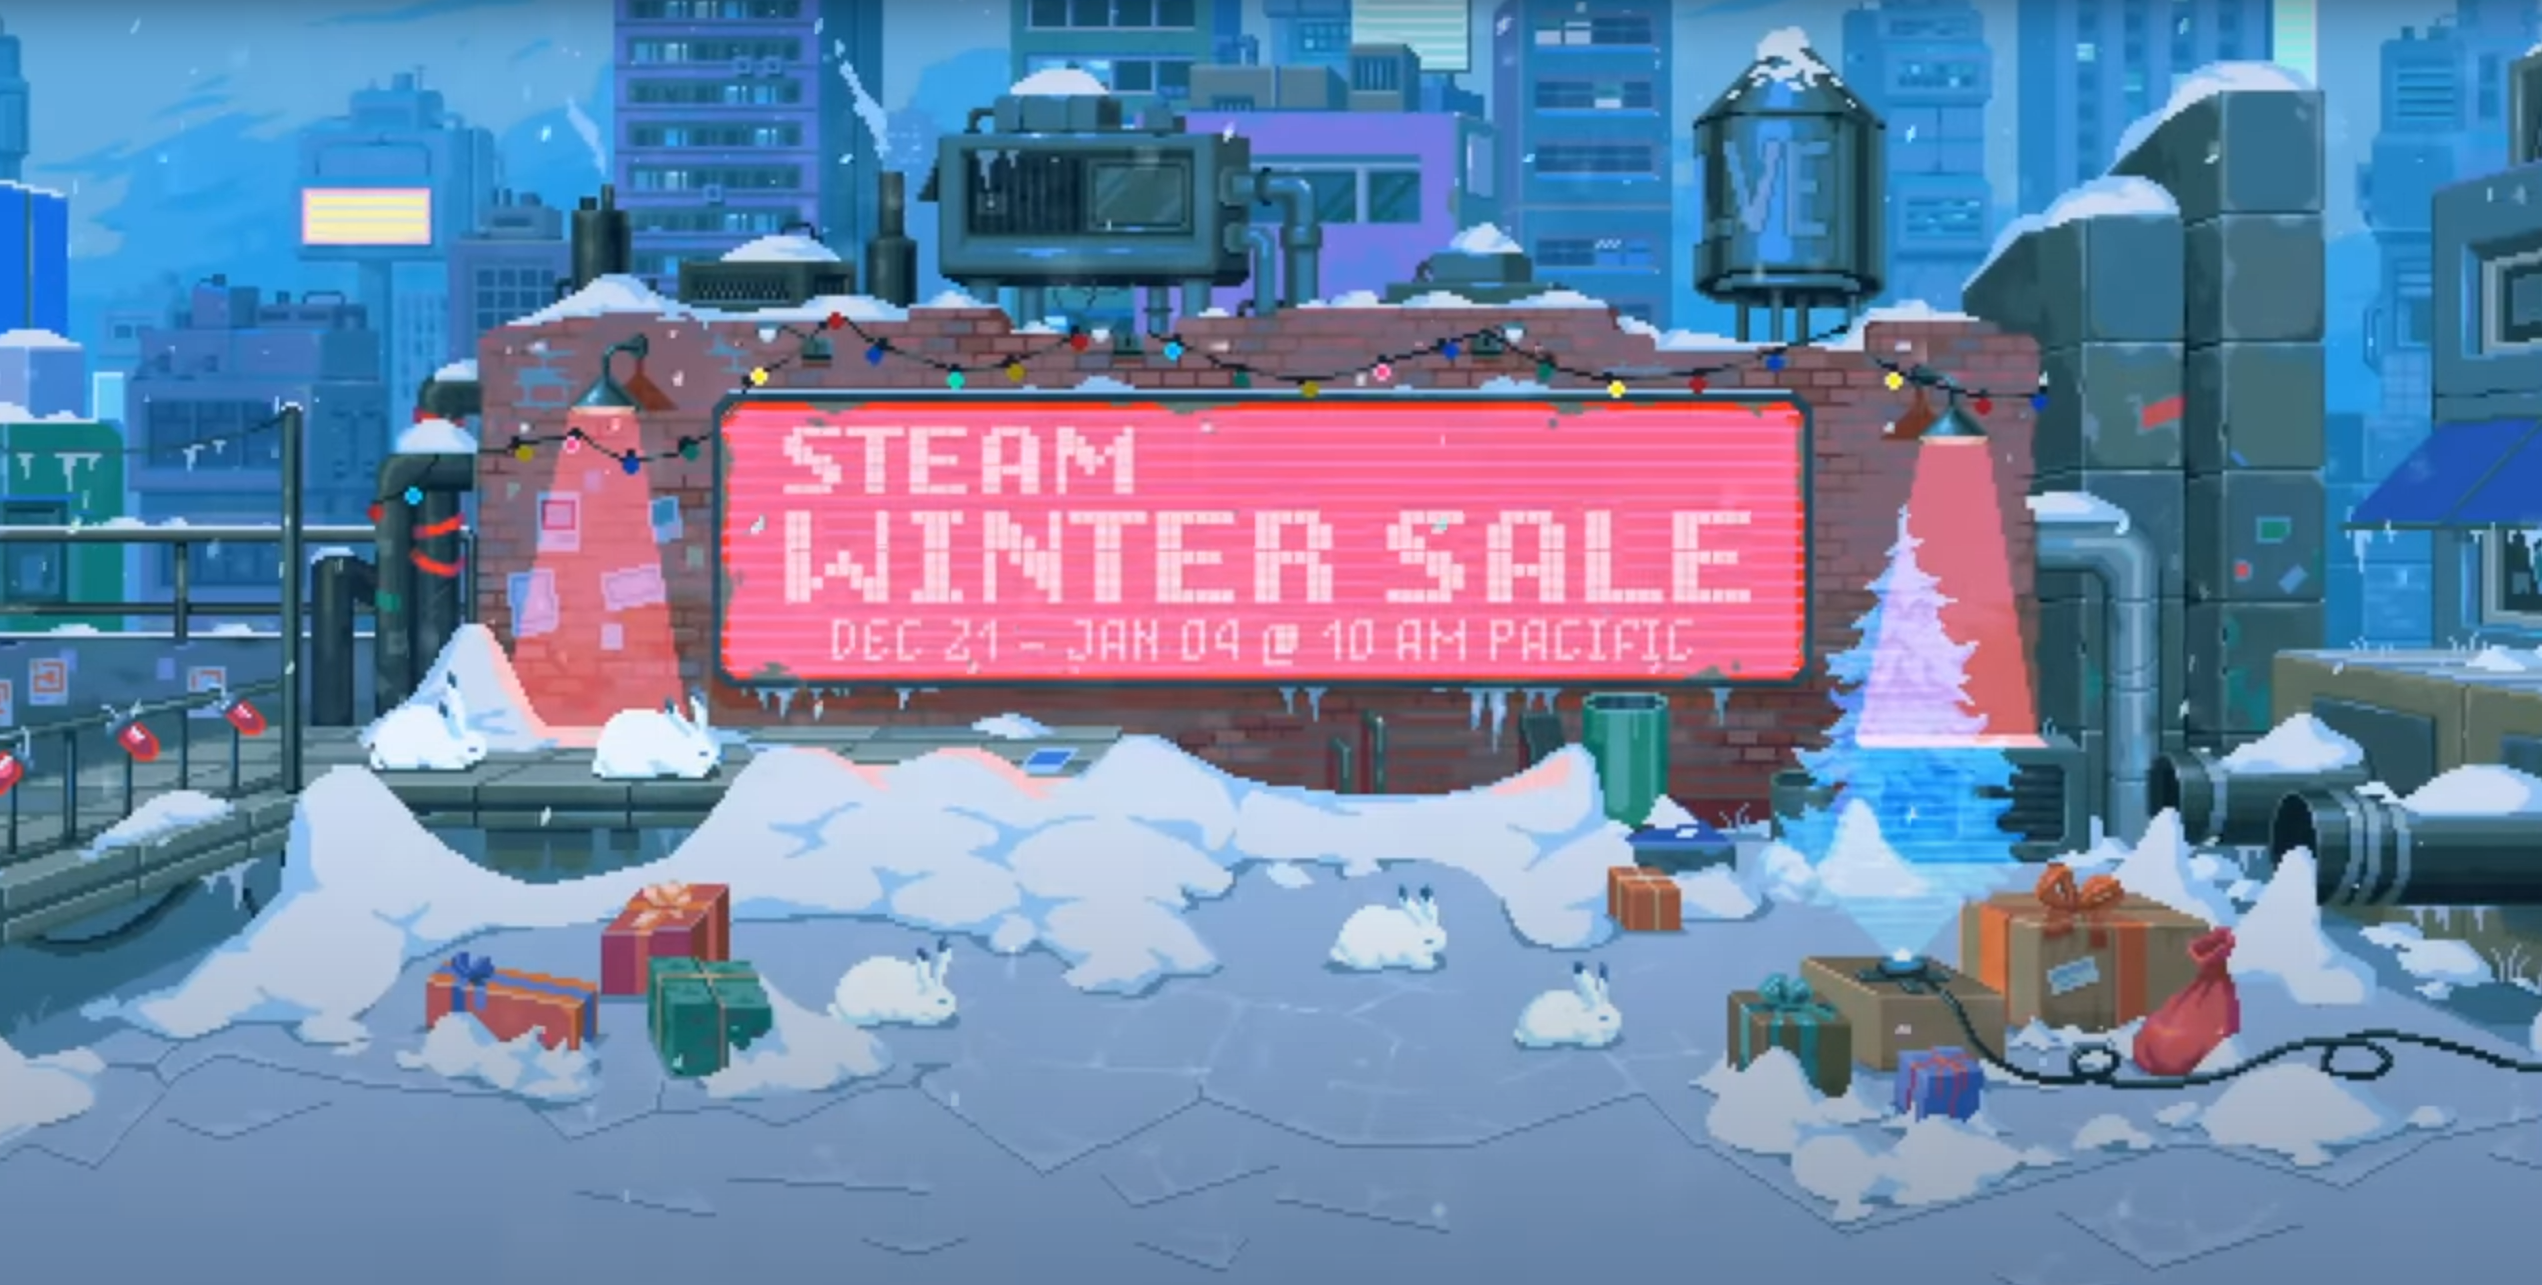 Key art for the Steam Winter Sale